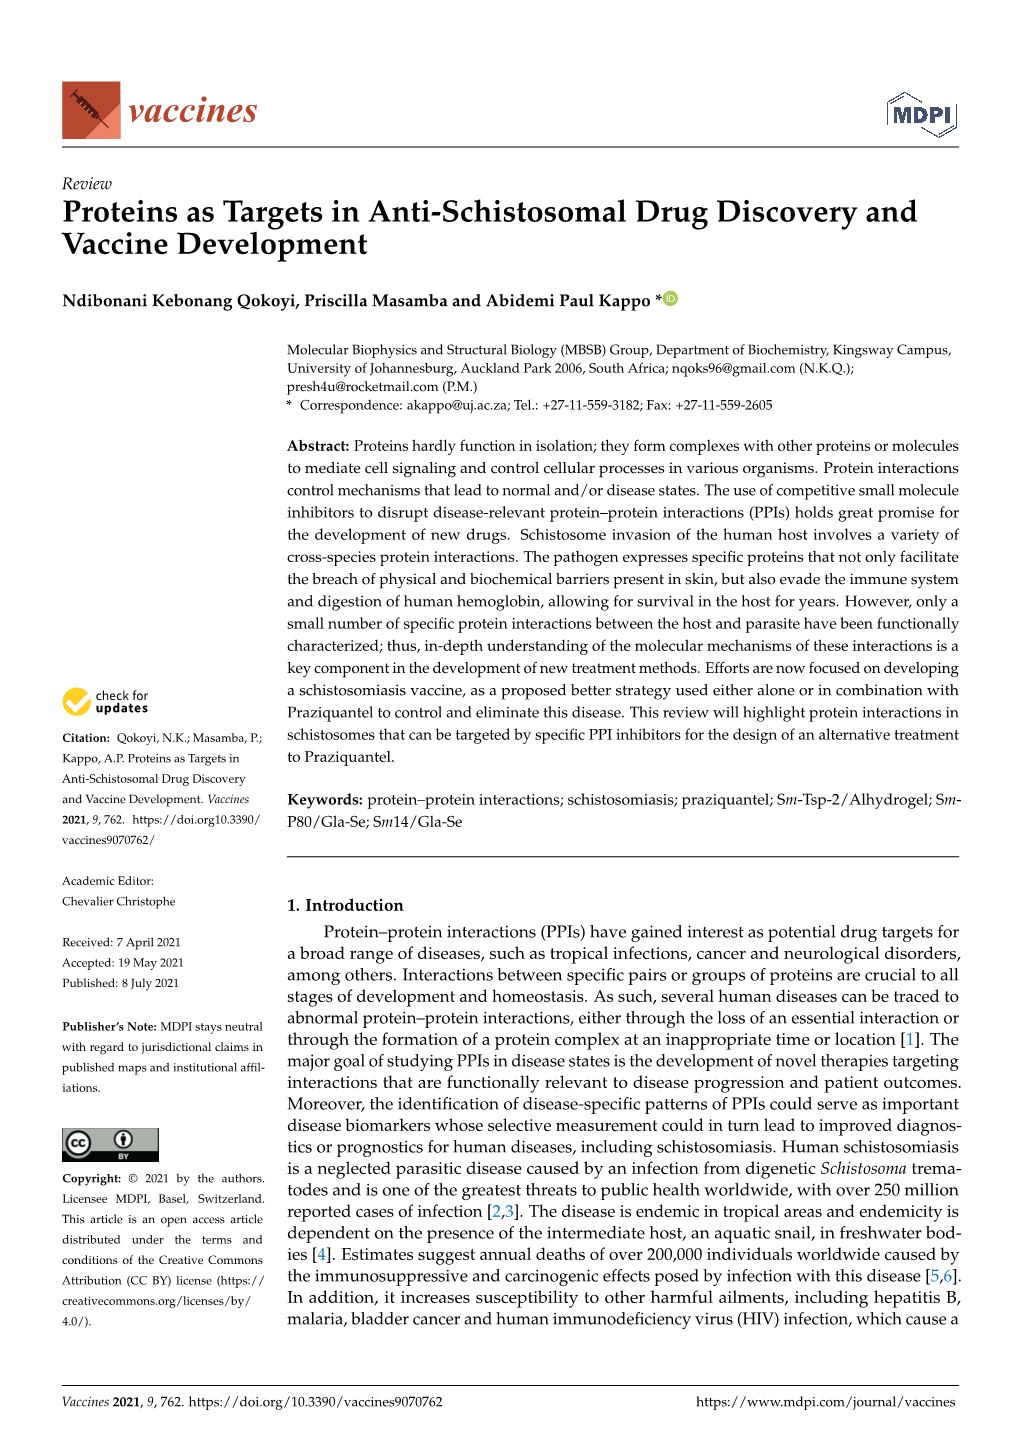 Proteins As Targets in Anti-Schistosomal Drug Discovery and Vaccine Development